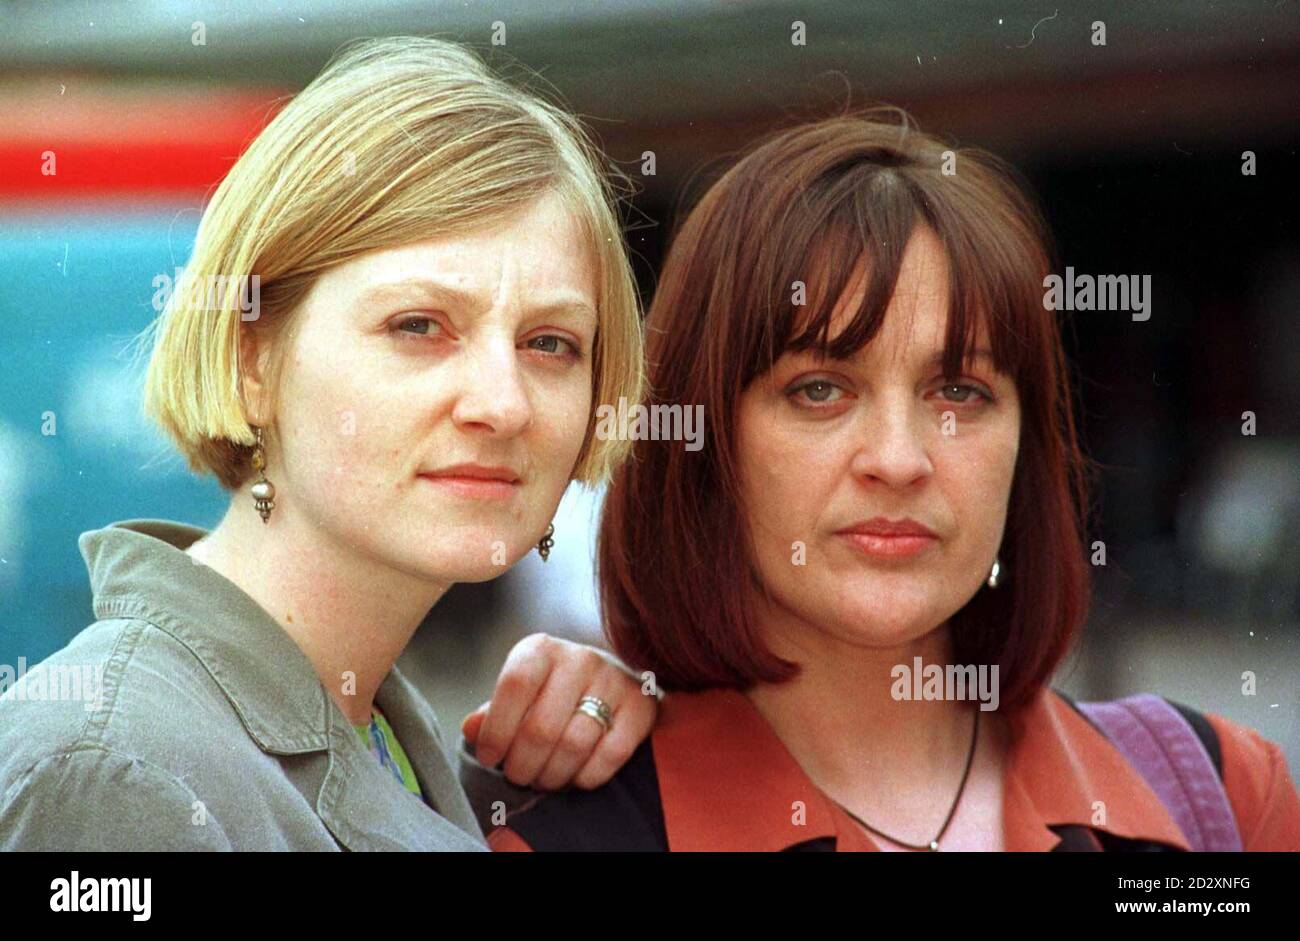 Catherine Mosely (left) and Julie Mangan at Heathrow Airport before flying to New Delhi, India to campaign or information on the Hostages in Kashmir who are Kieth Mangan (husband of Julia) and Paul Wells (boyfriend of Catherine) Photo Tim Ockenden /PA Stock Photo